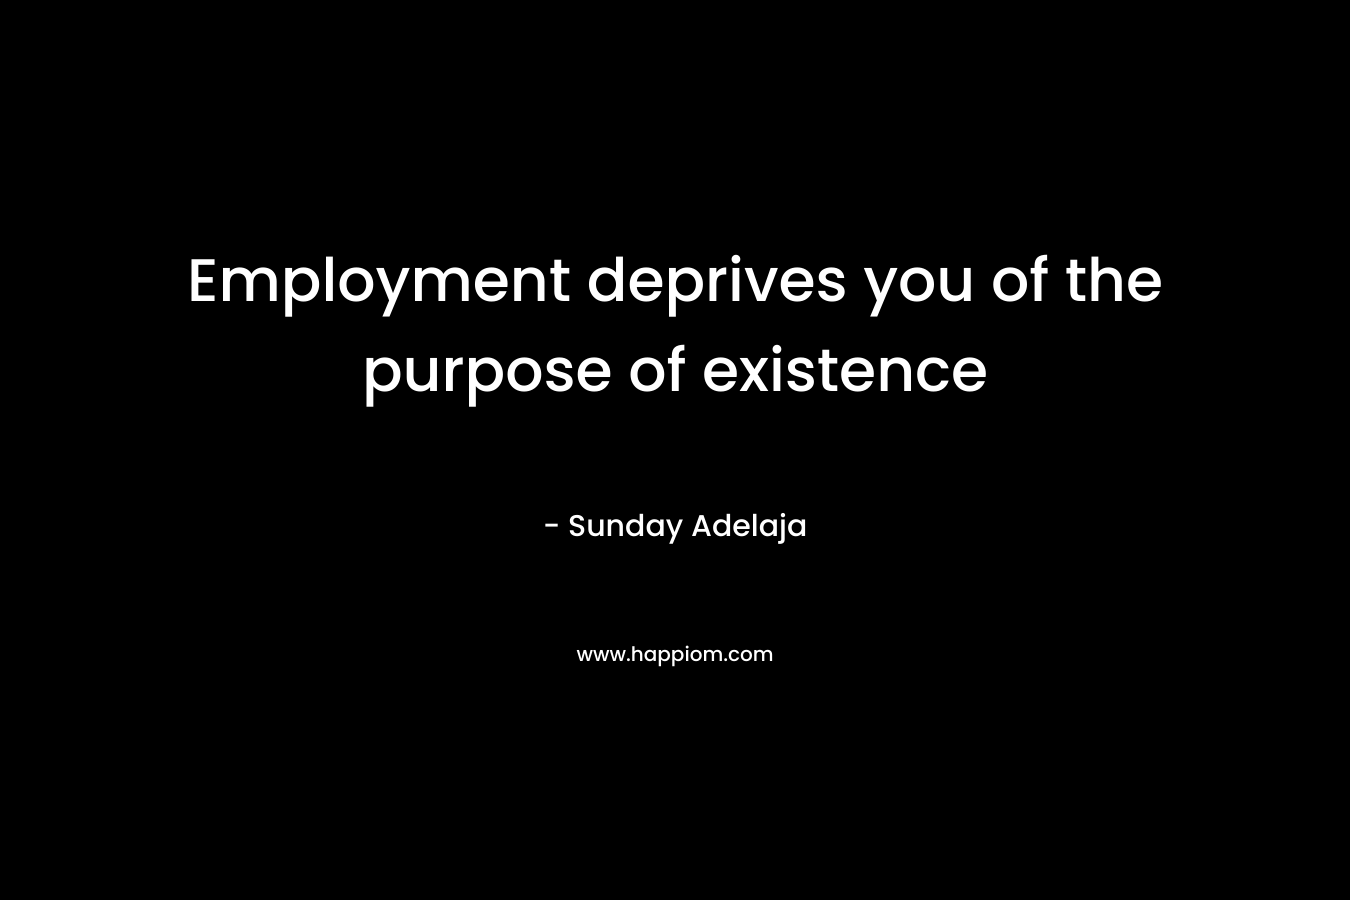 Employment deprives you of the purpose of existence